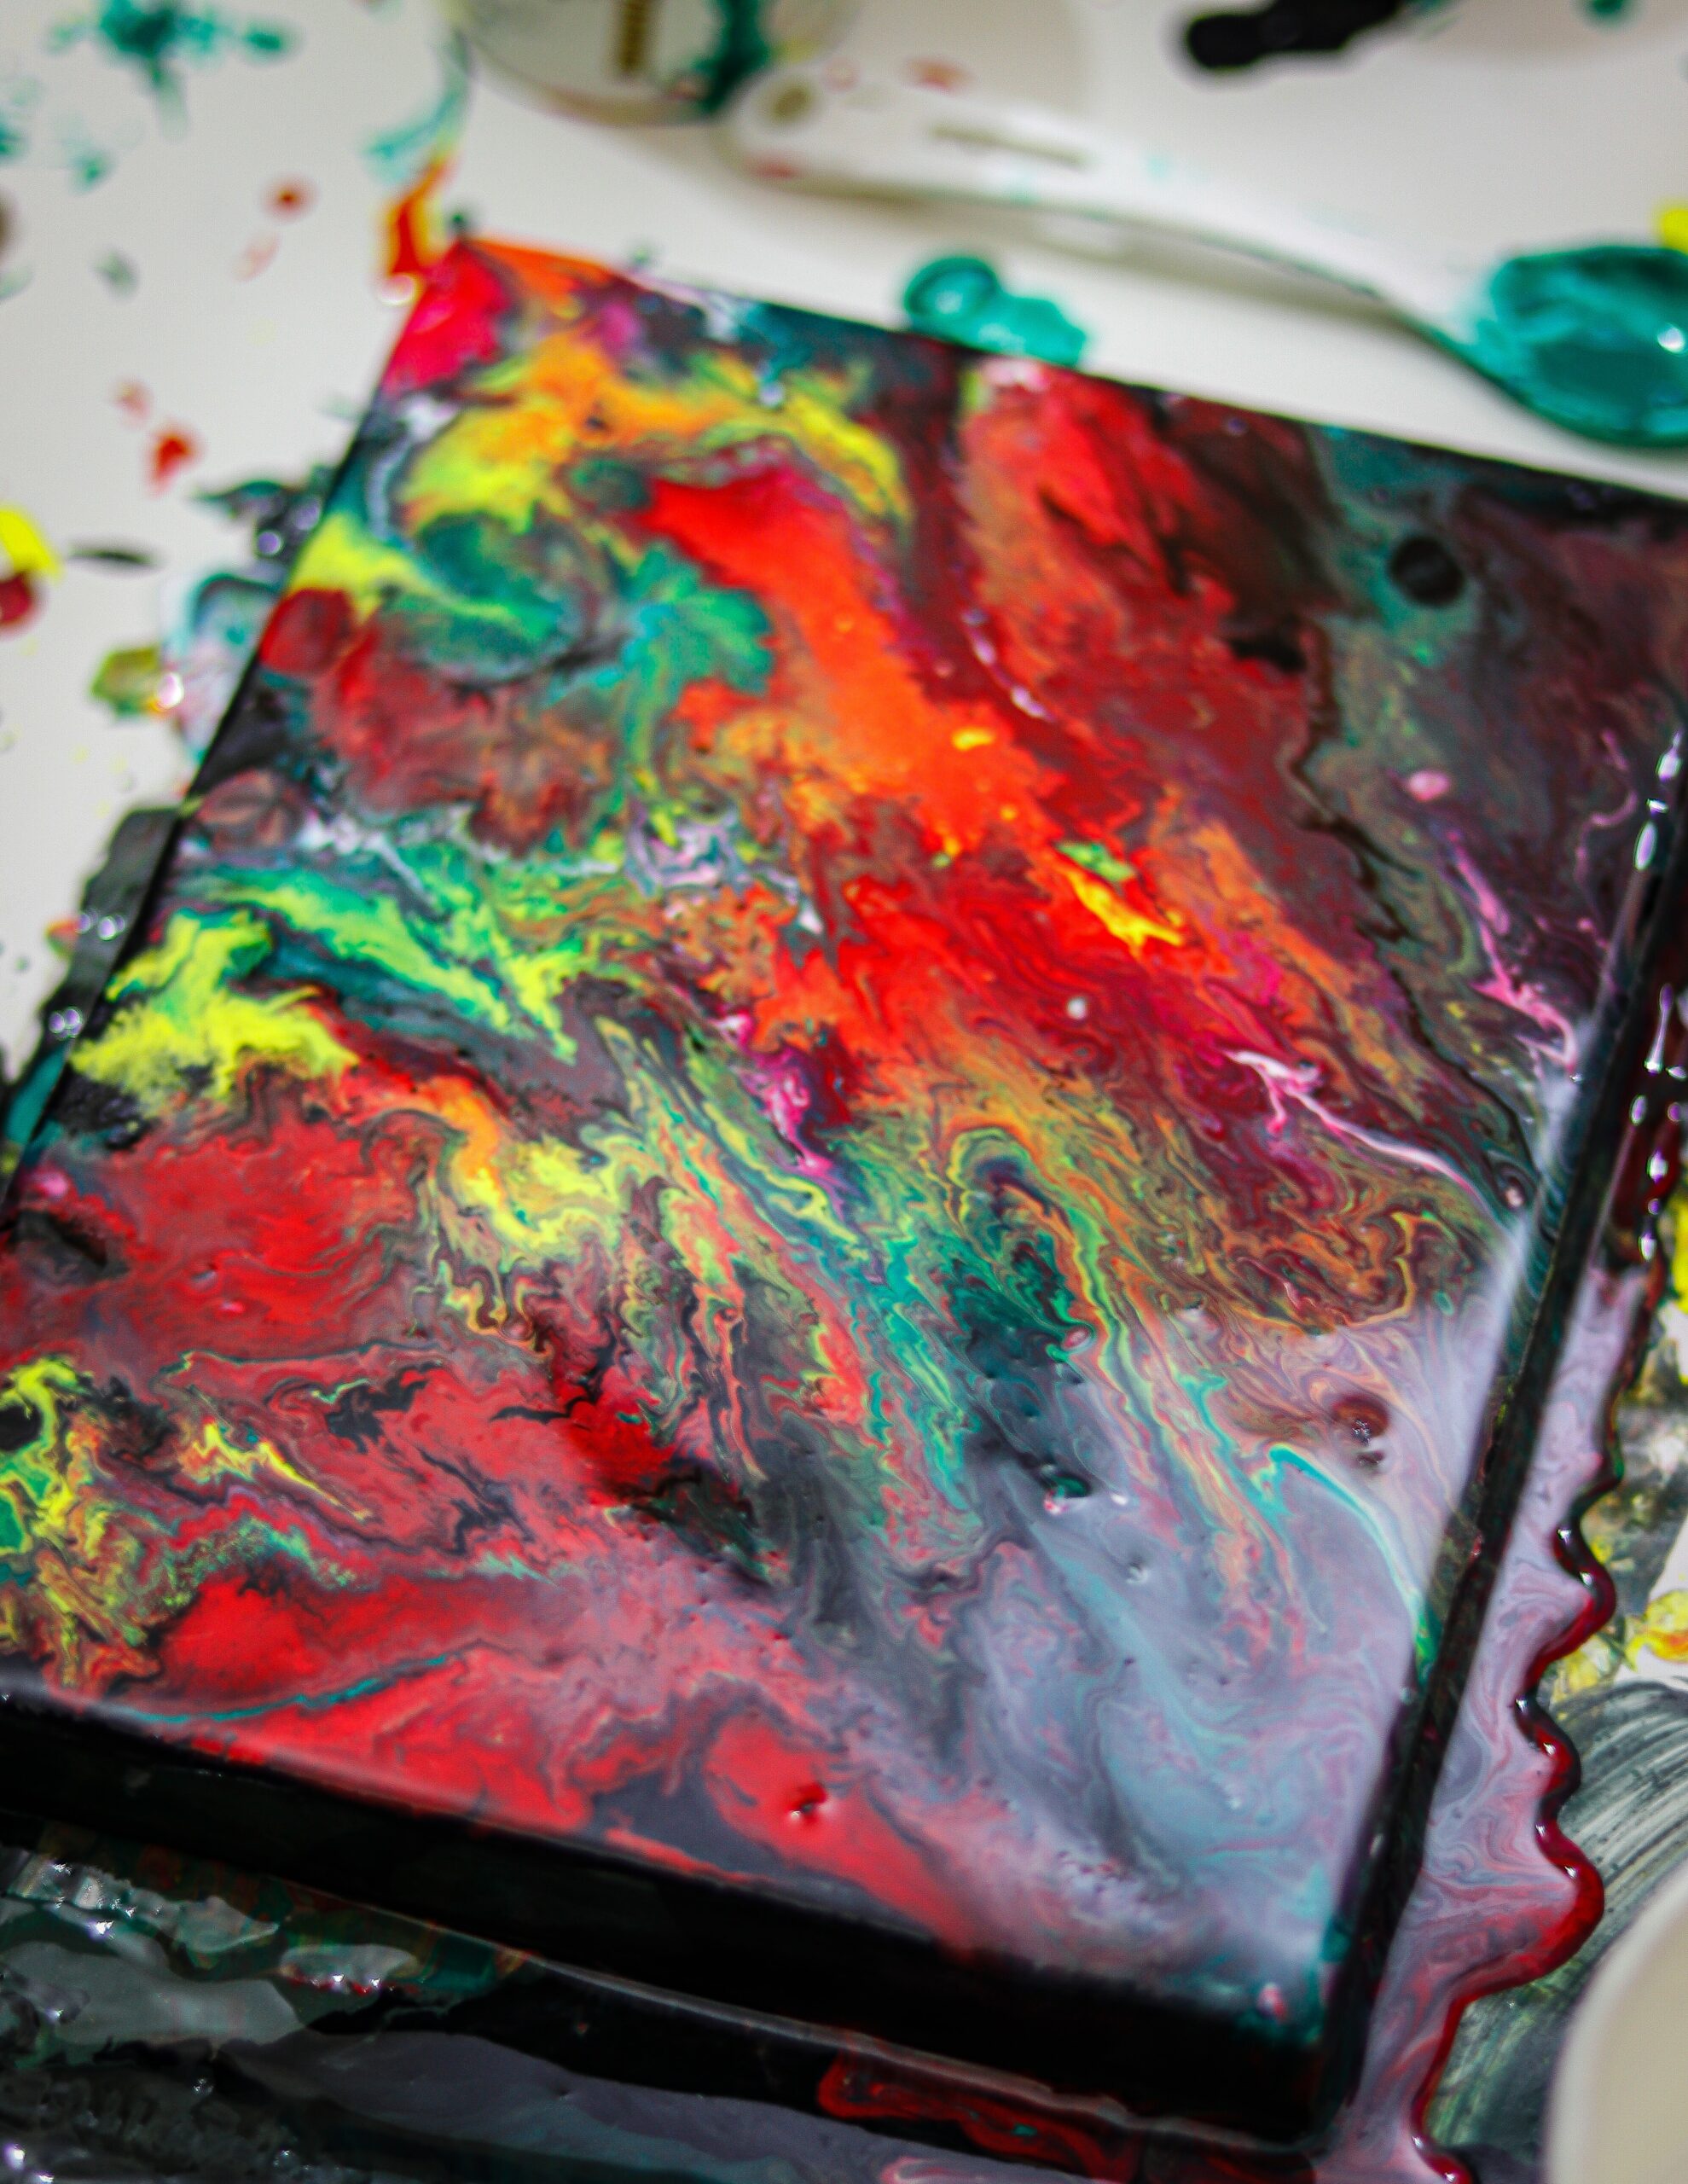 Acrylic Pouring Art - How to make artwork using acrylic pouring